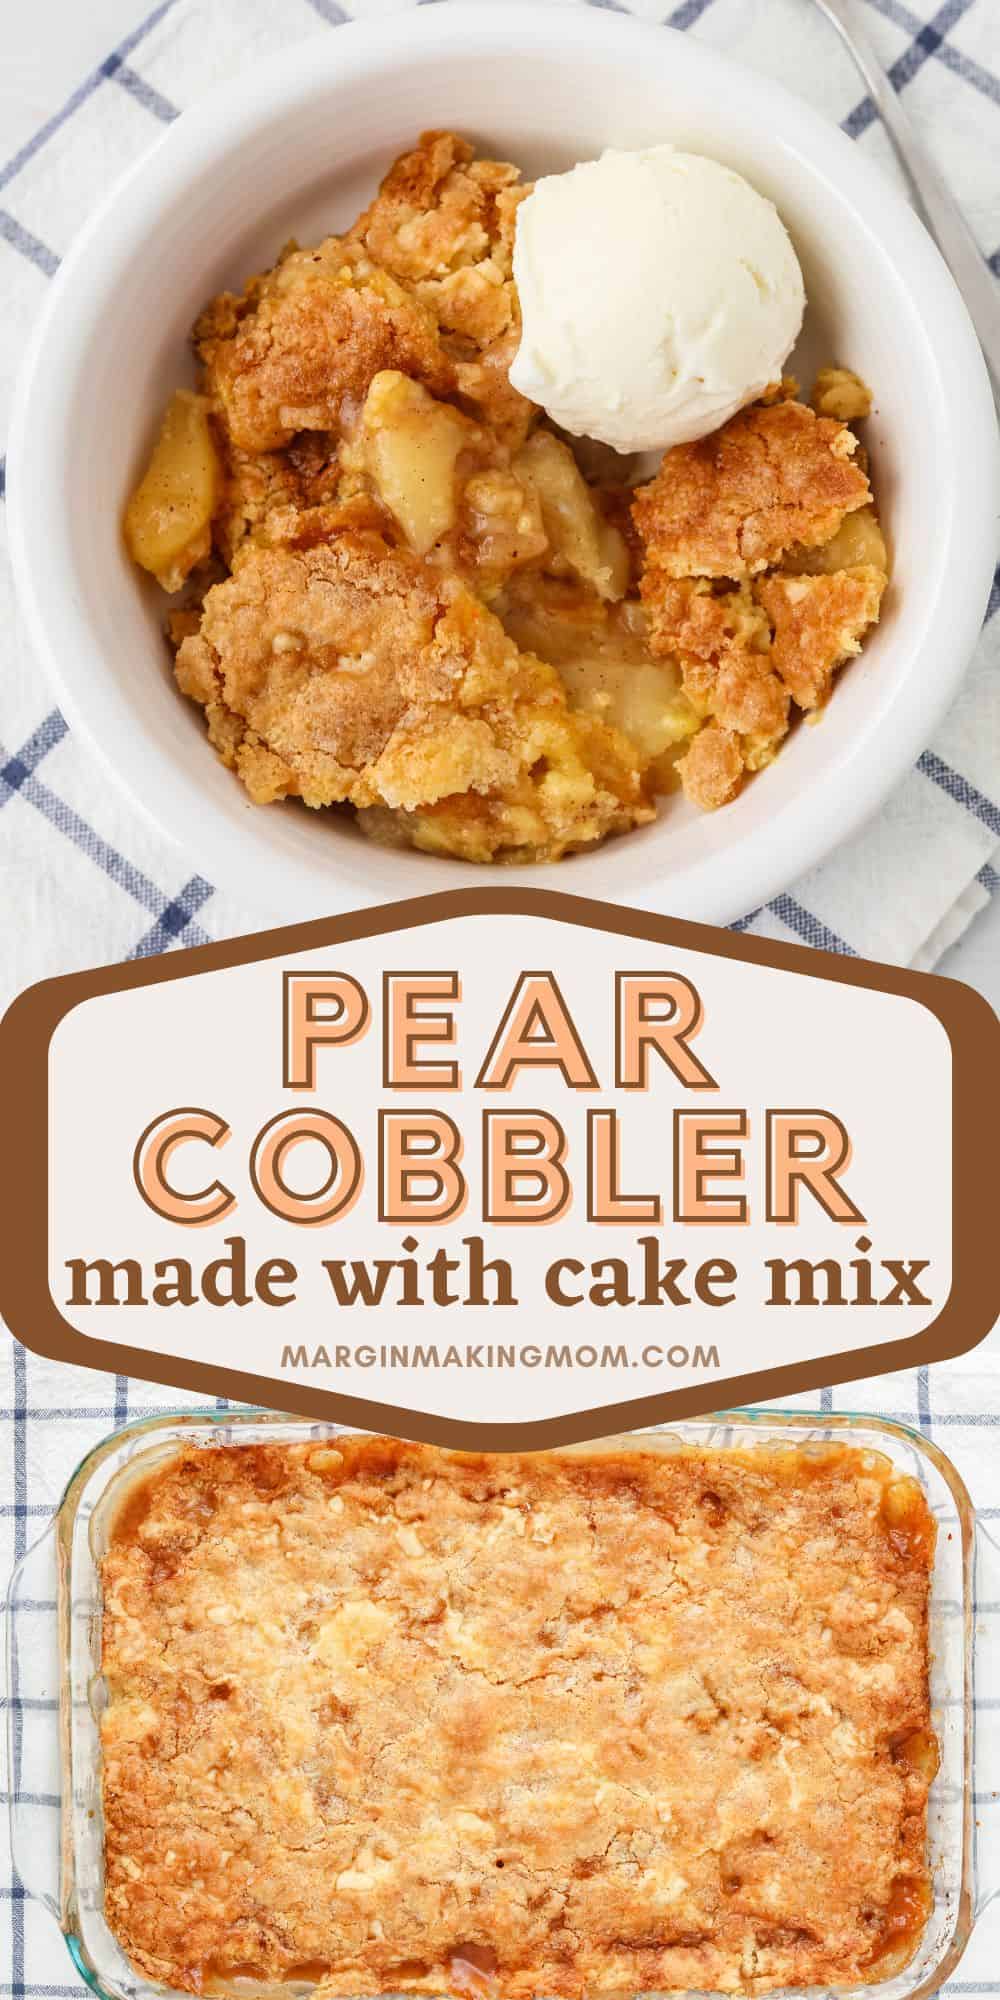 two photos; one shows a bowl of cake mix pear cobbler, the other shows a full baking dish of the dessert.